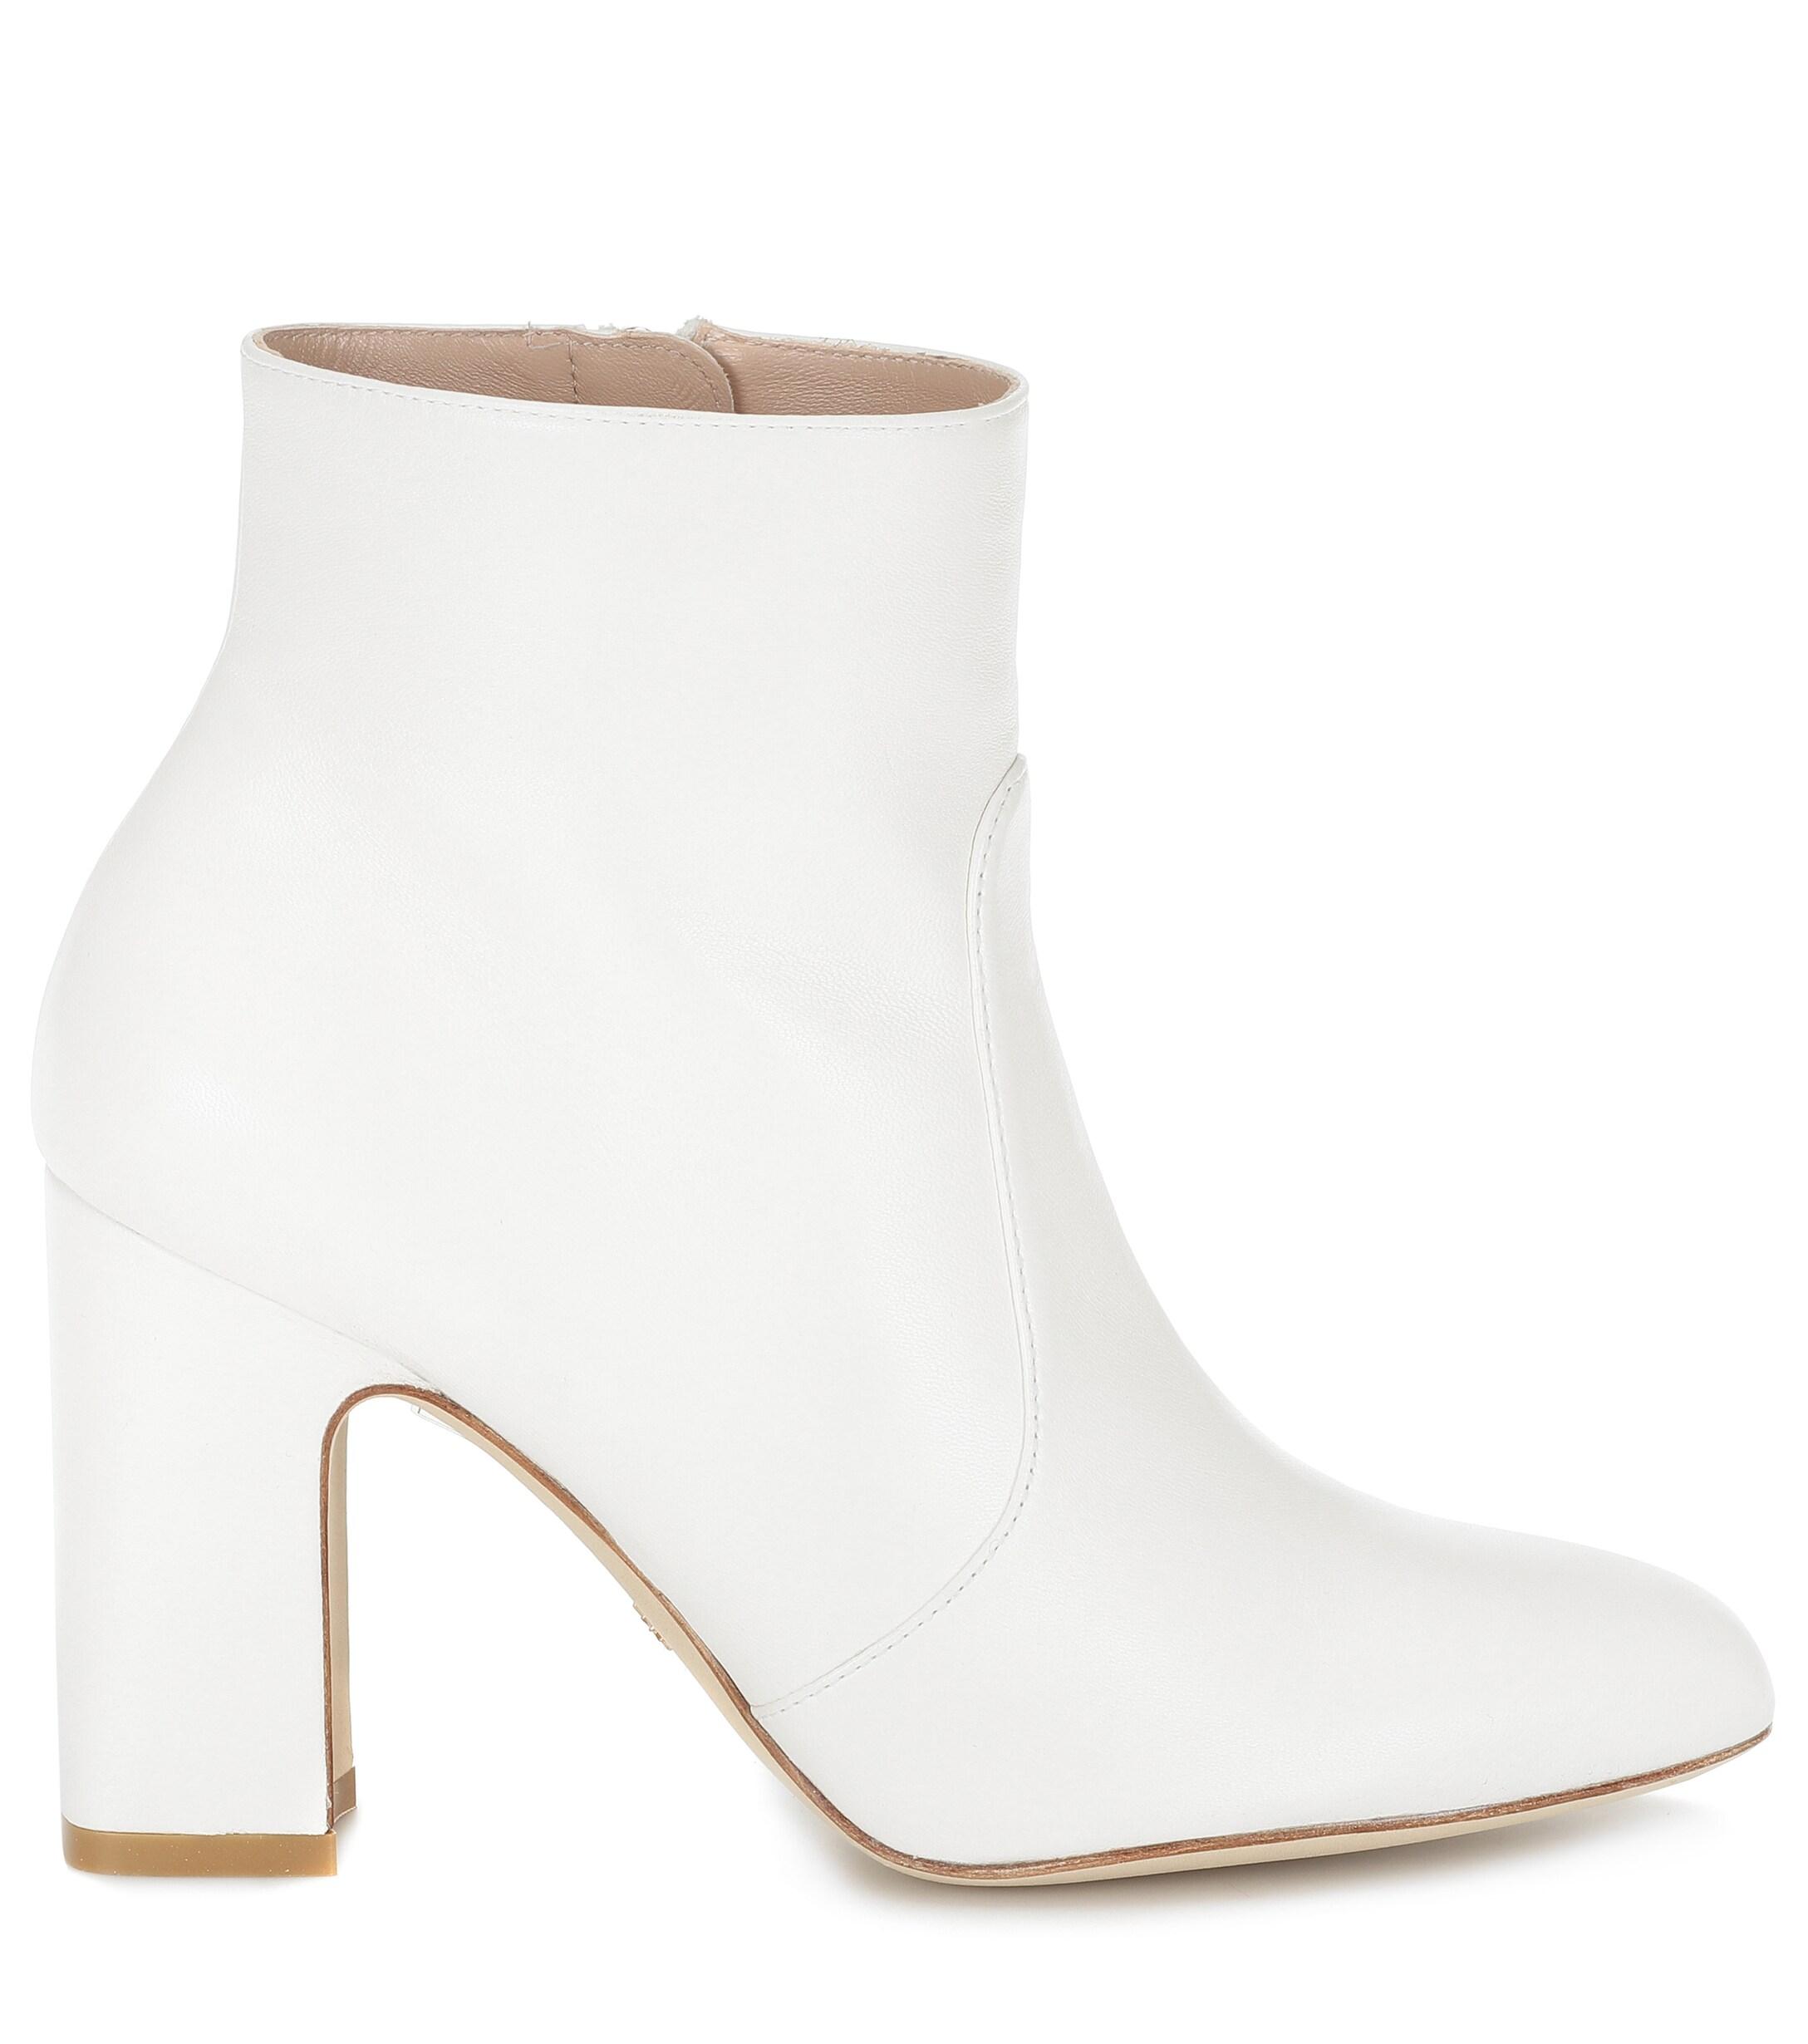 Stuart Weitzman Nell Leather Ankle Boots in White - Lyst